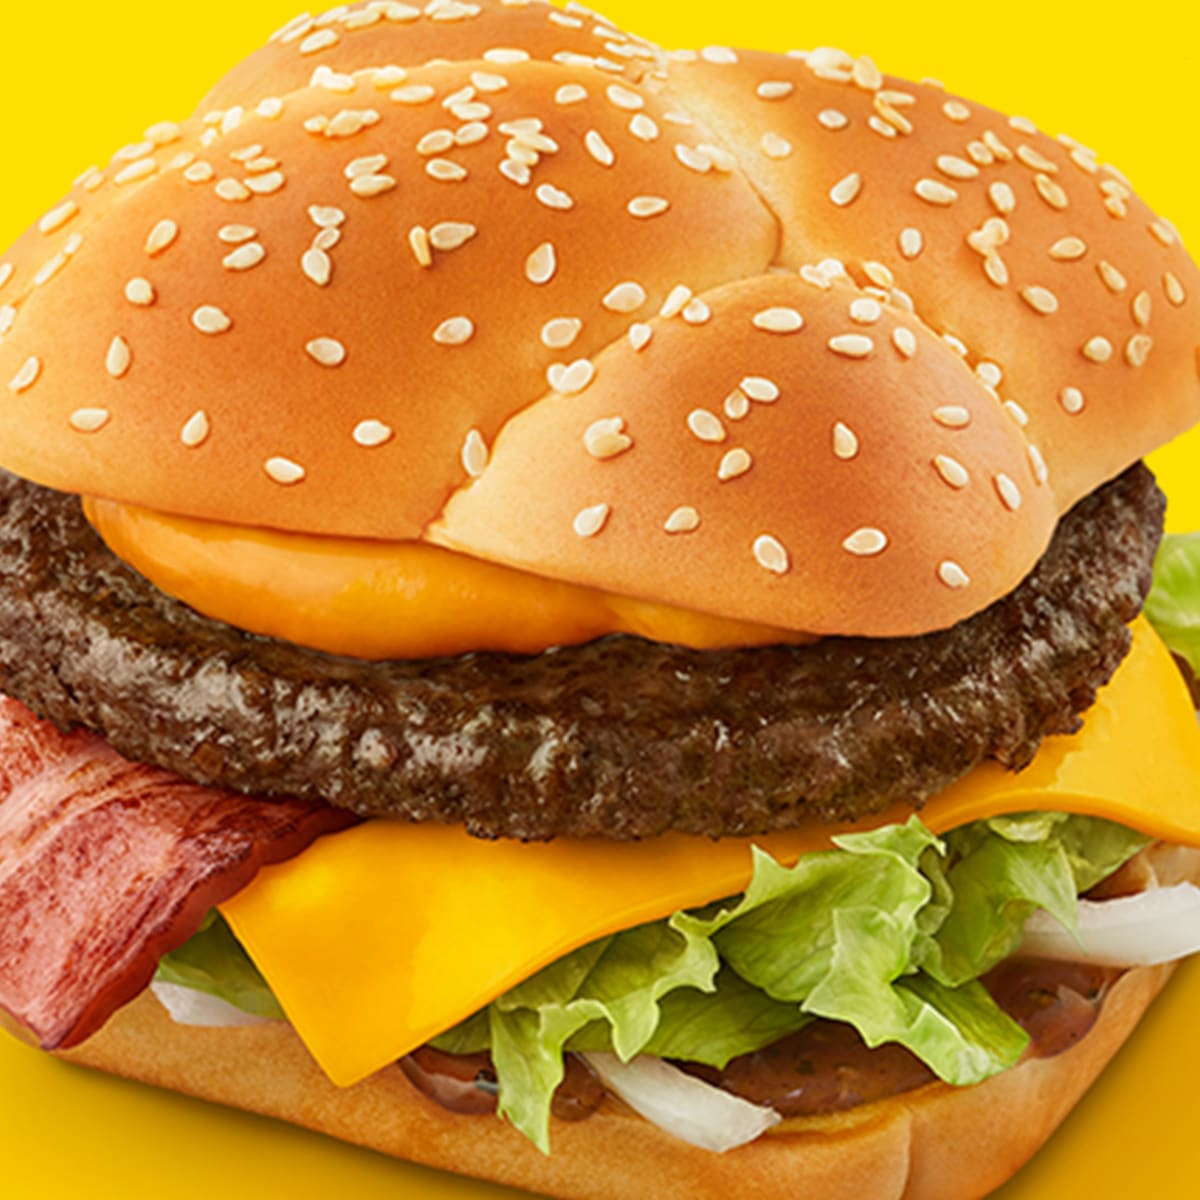 McDonald's Adds a New Burger to Its Menu And It Looks Looks Awfully  Familiar - TheStreet